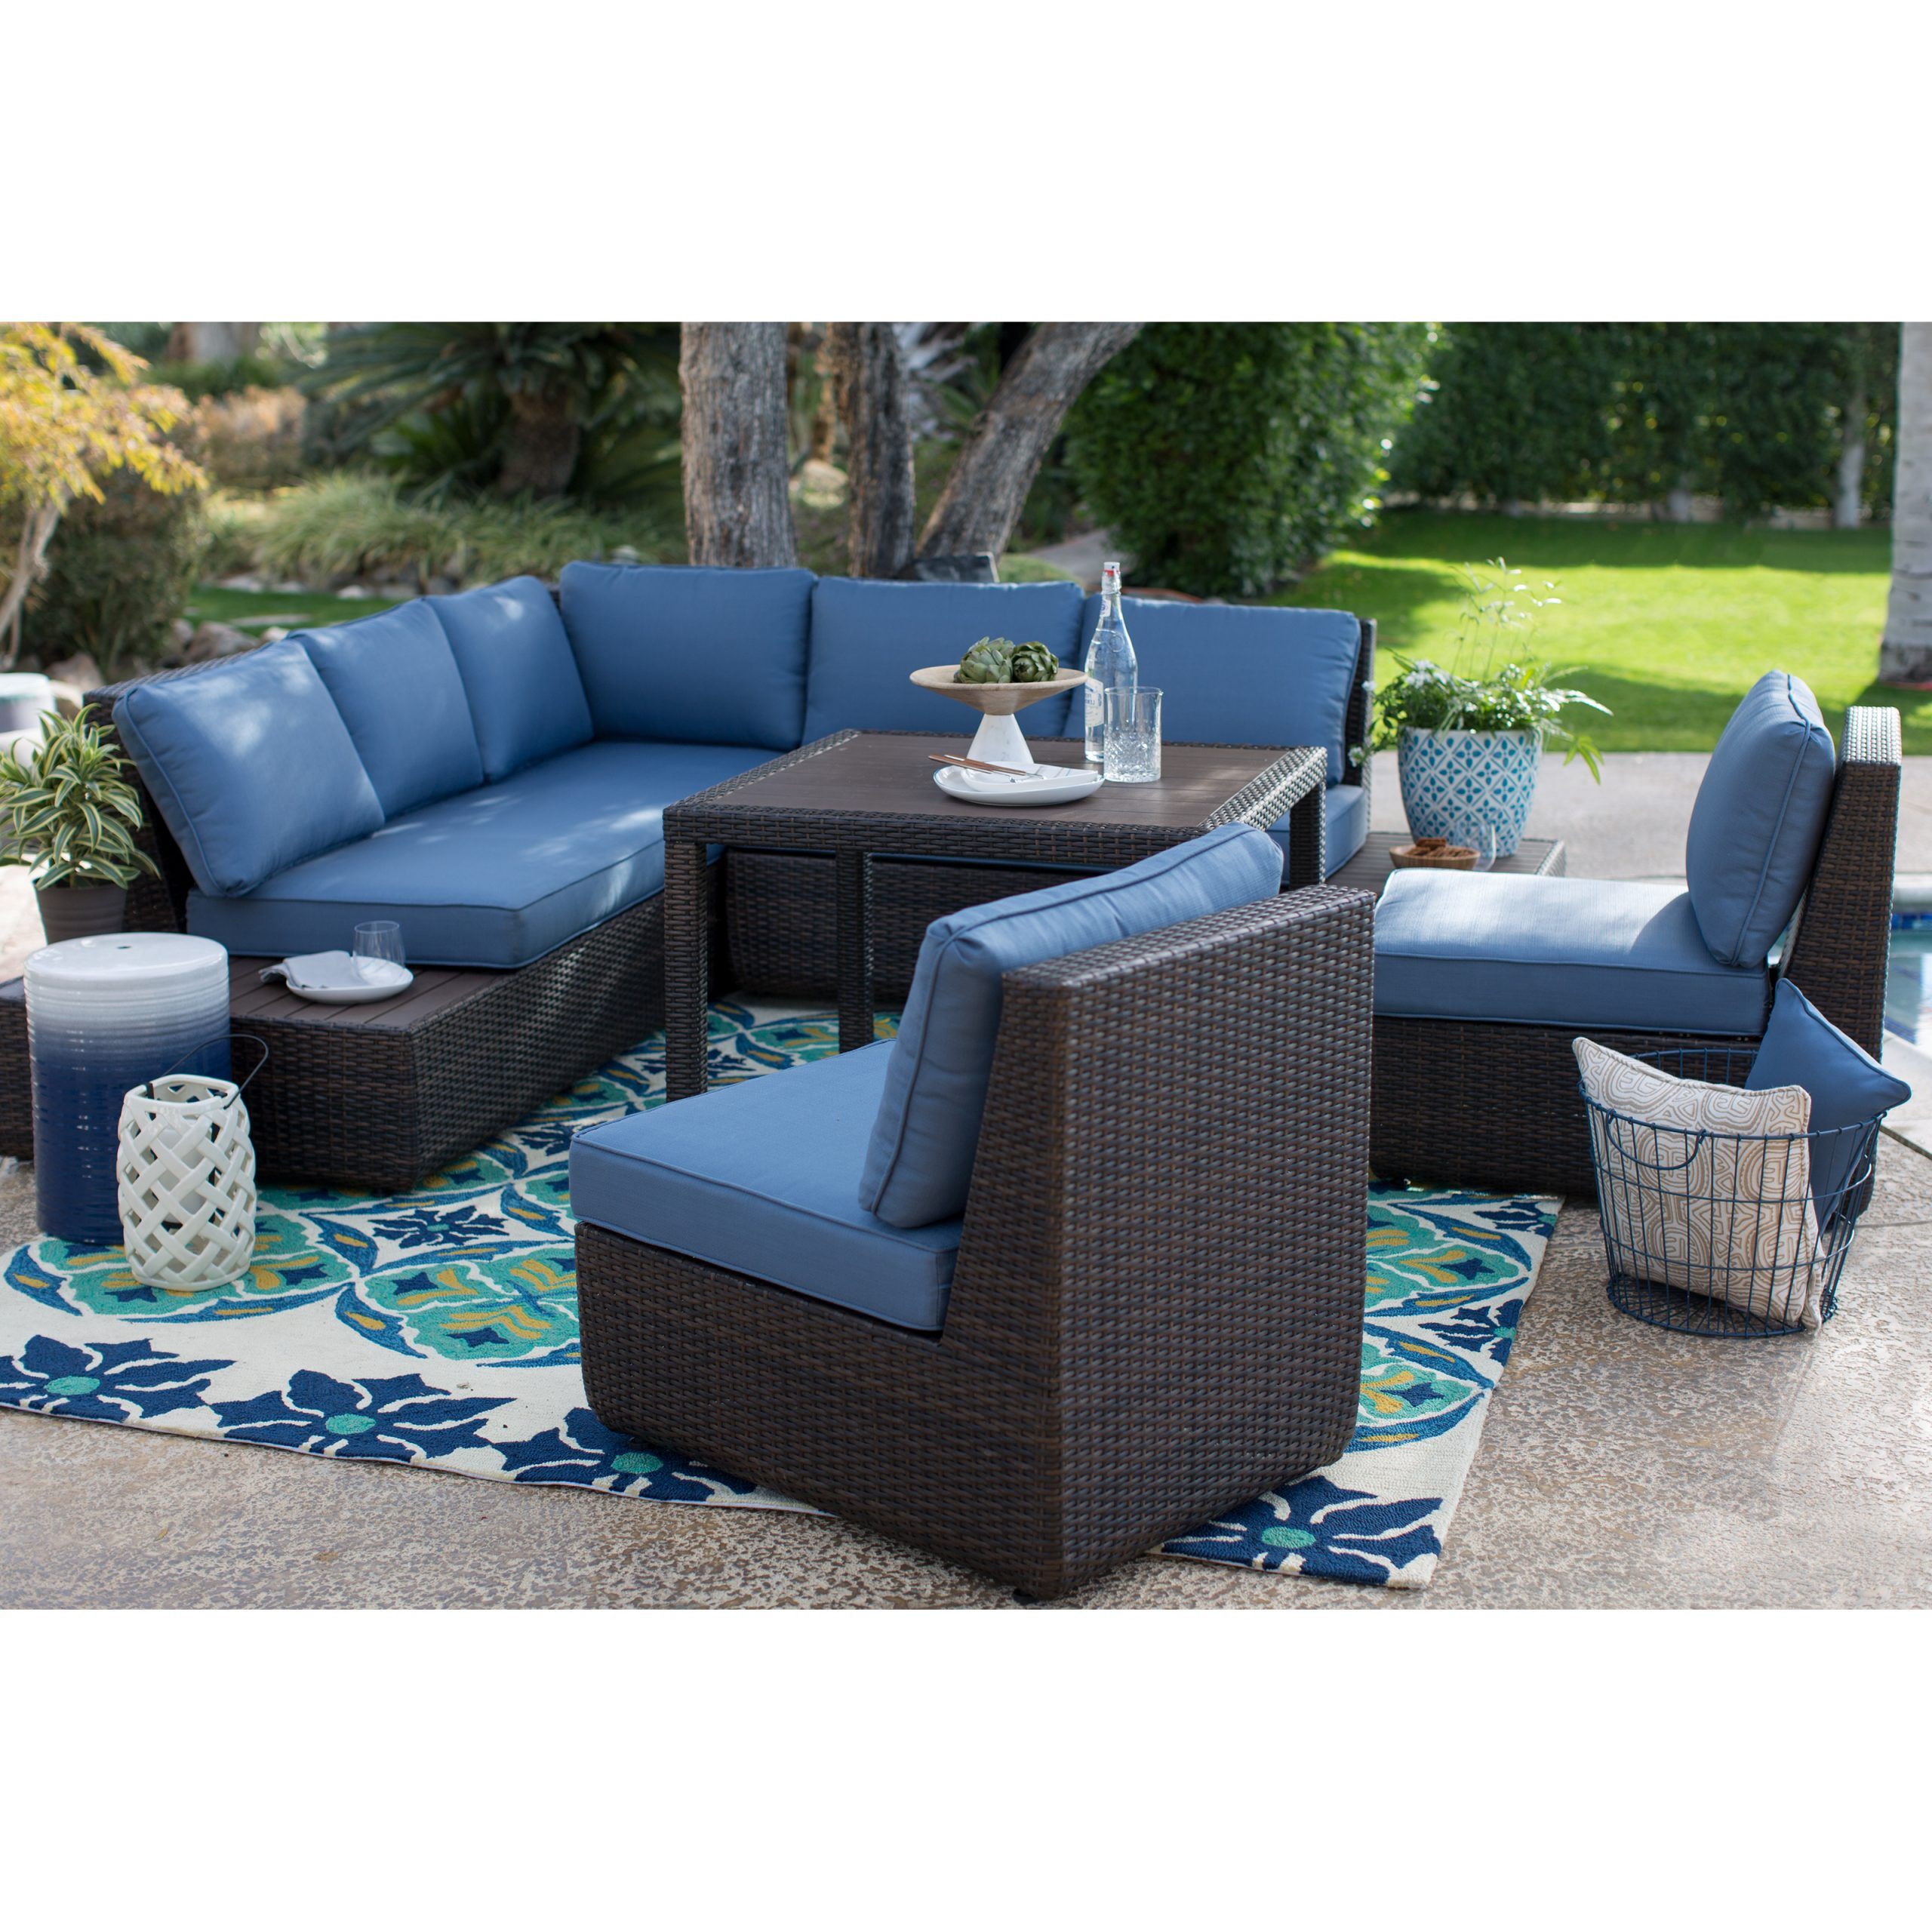 Latest Belham Living Luciana Bay All Weather Wicker Sofa Sectional Patio Pertaining To Outdoor Seating Sectional Patio Sets (View 6 of 15)